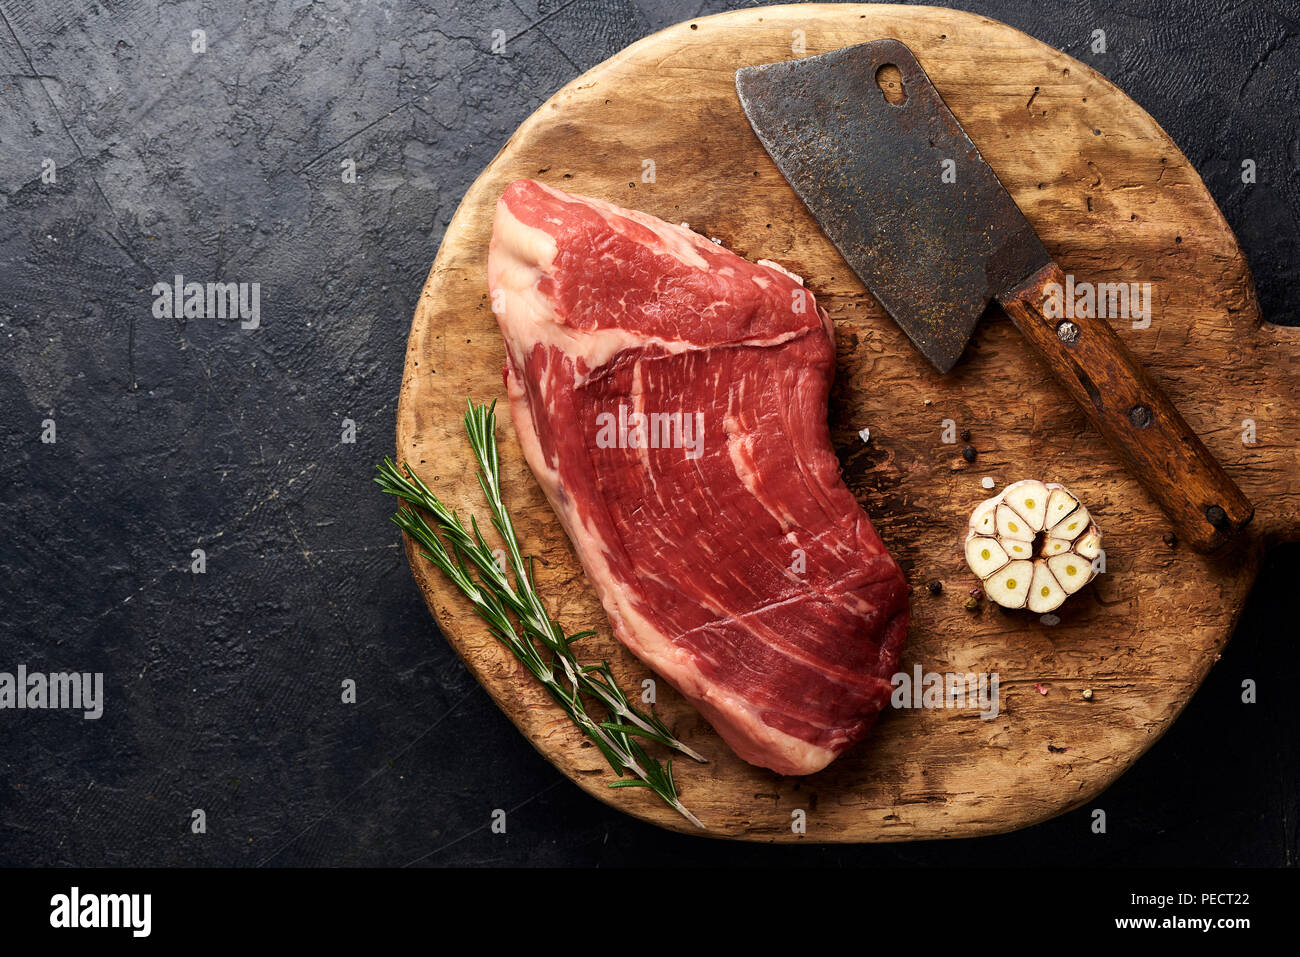 Raw fresh marbled meat Black Angus steak and vintage meat cleaver on wooden board. Meat on black background with rosemary and garlic. Copy space. Top view. Stock Photo